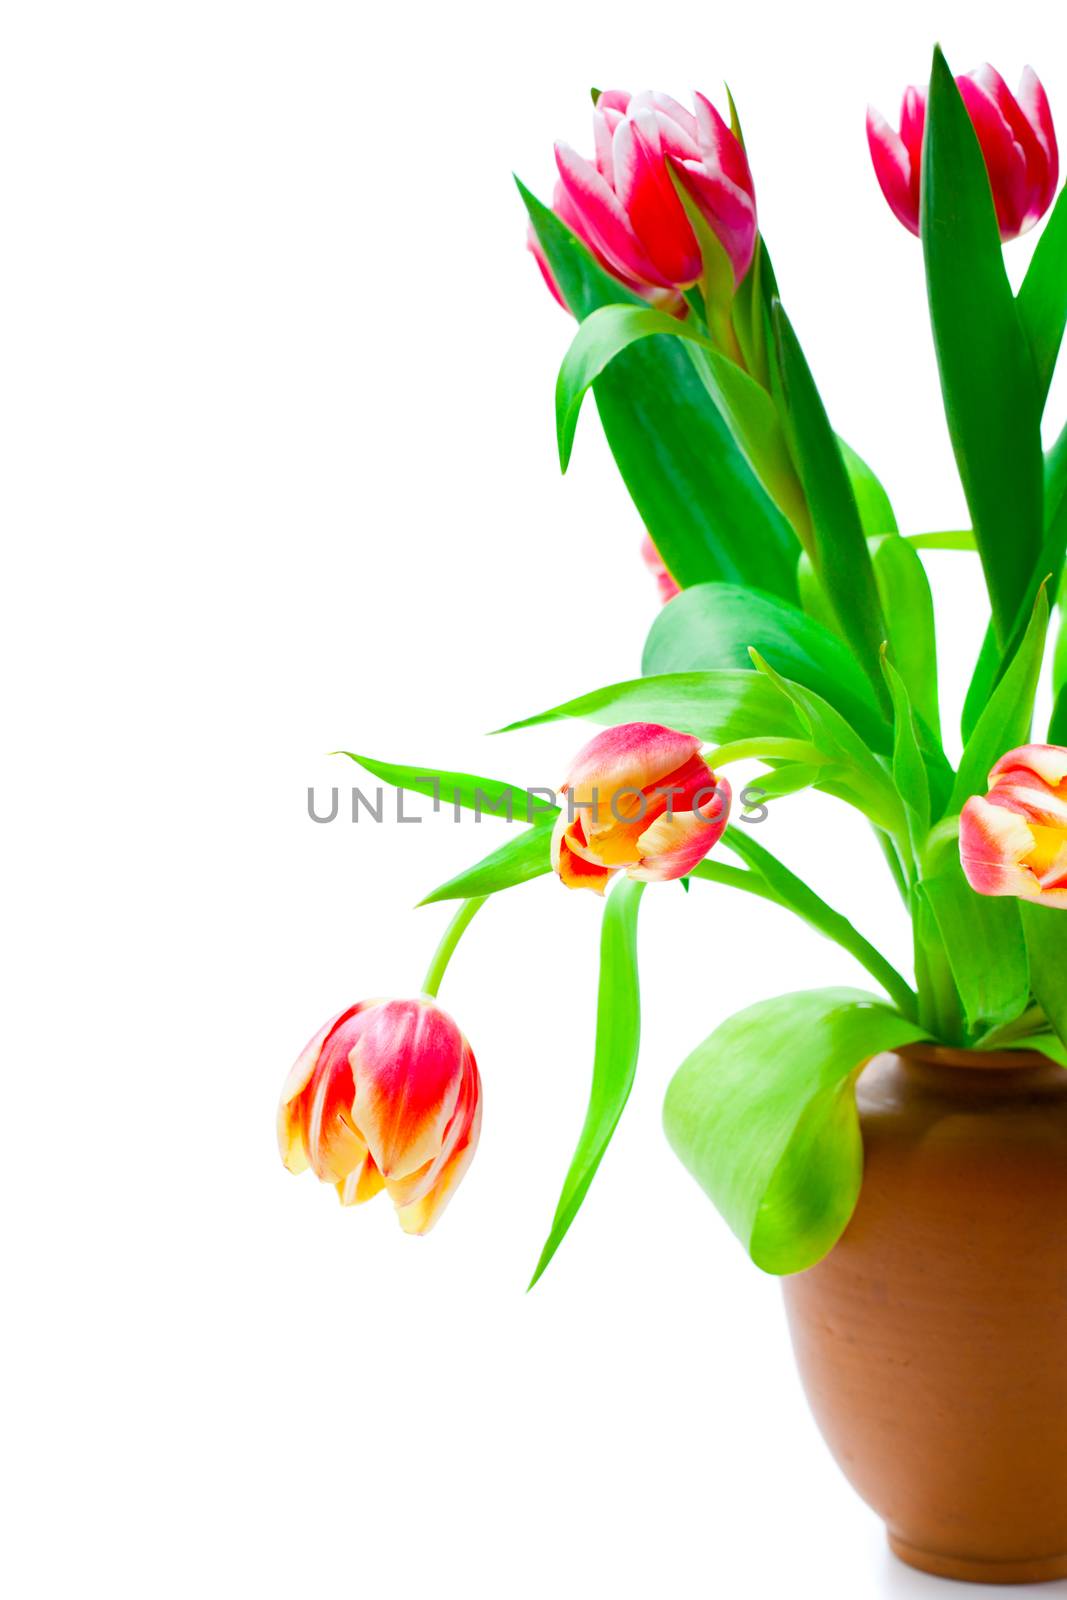 Beautiful red tulips in a vase on a white background (with sampl by motorolka